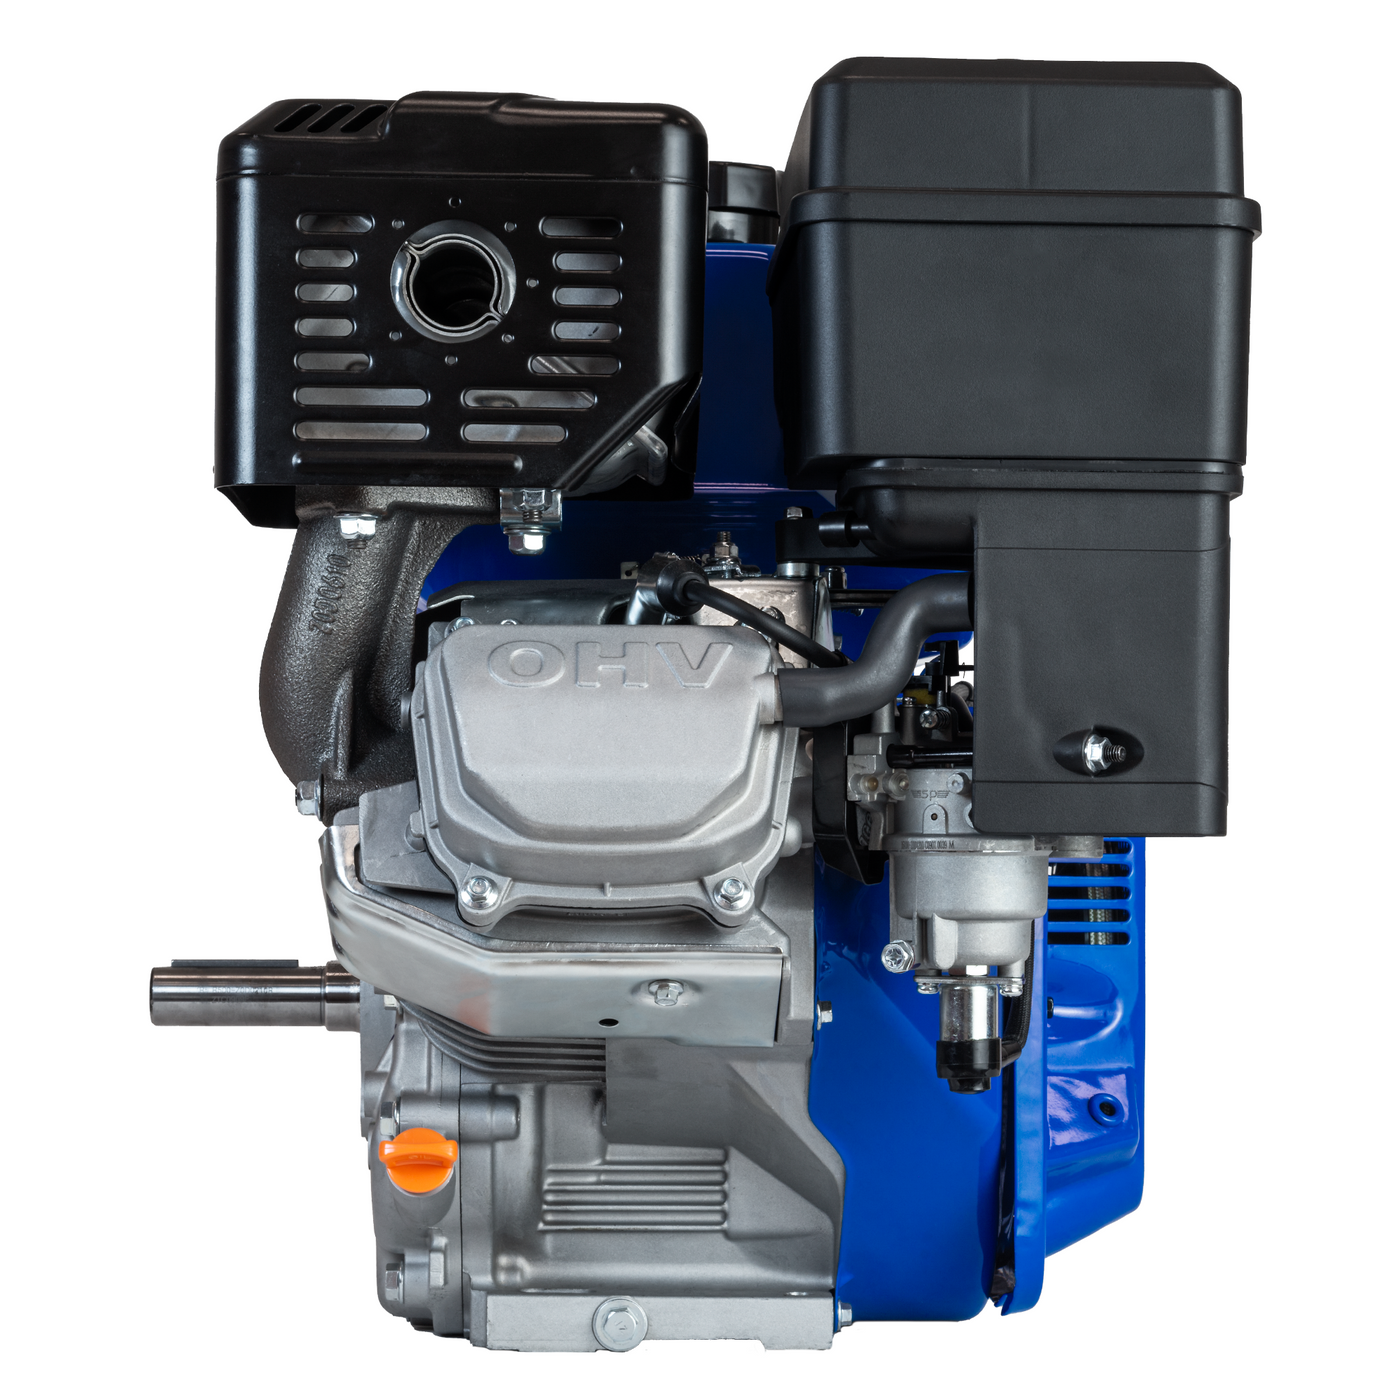 DuroMax XP20HPE 500cc 1-Inch Shaft Recoil/Electric Start Gasoline Engine